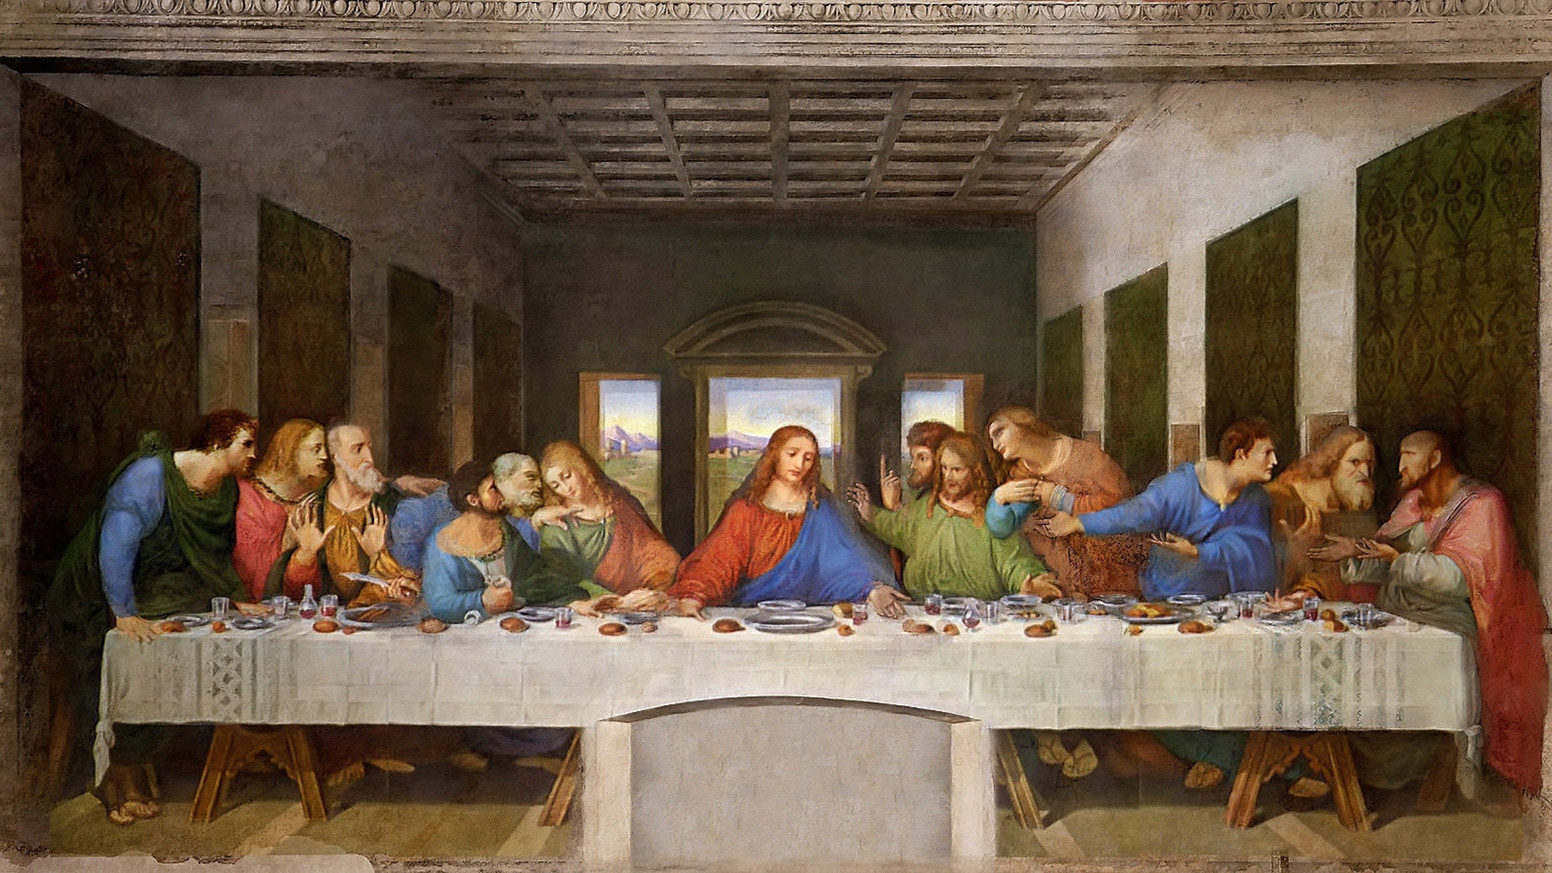 These 20 General Knowledge Questions Will Test Every Corner of Your Mind The Last Supper